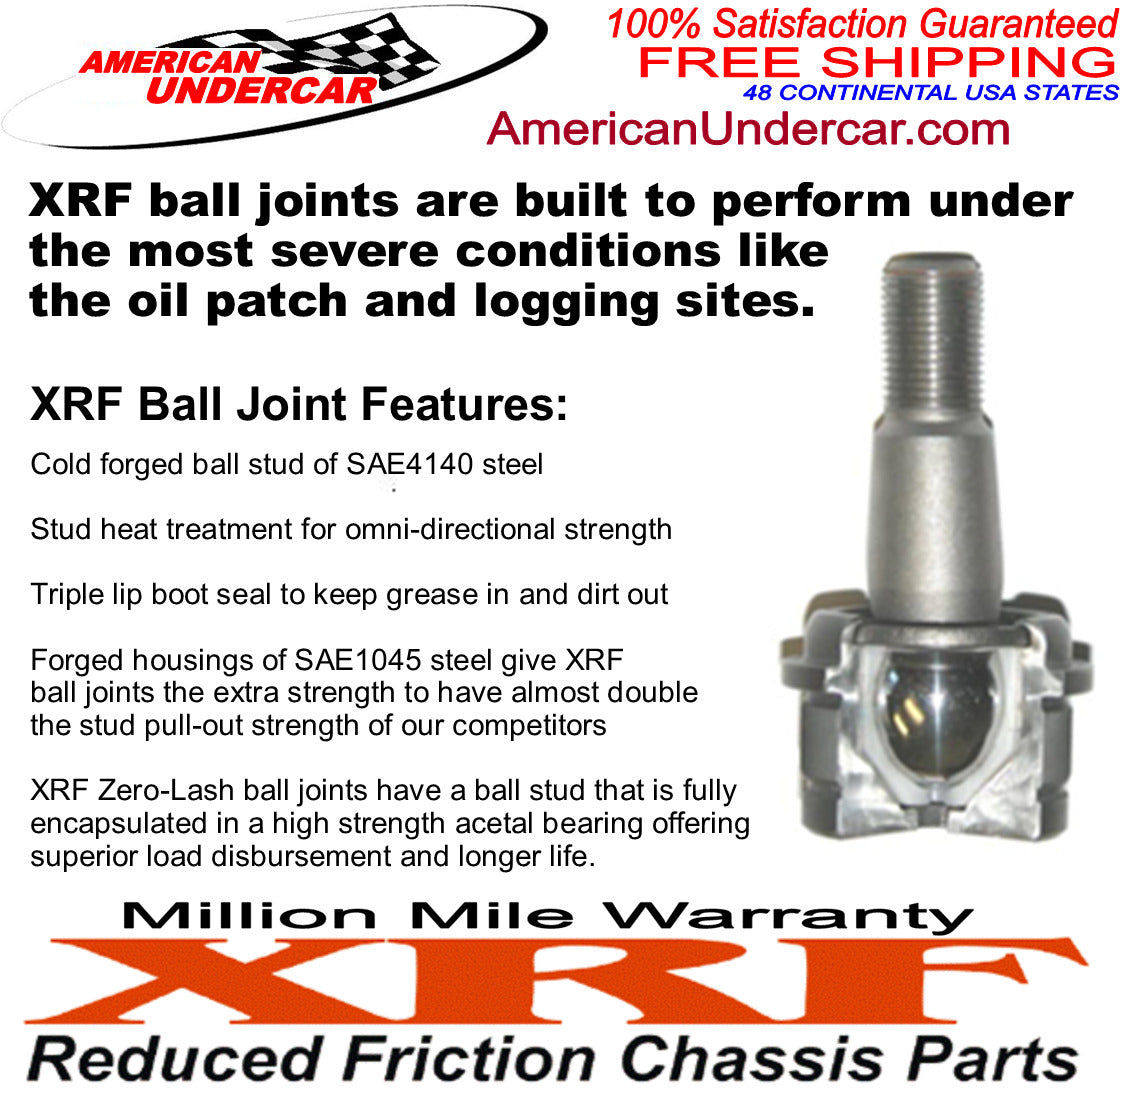 XRF Ball Joint Steering and Suspension Kit for 2009-2012 Dodge Ram 2500, 3500 4x4